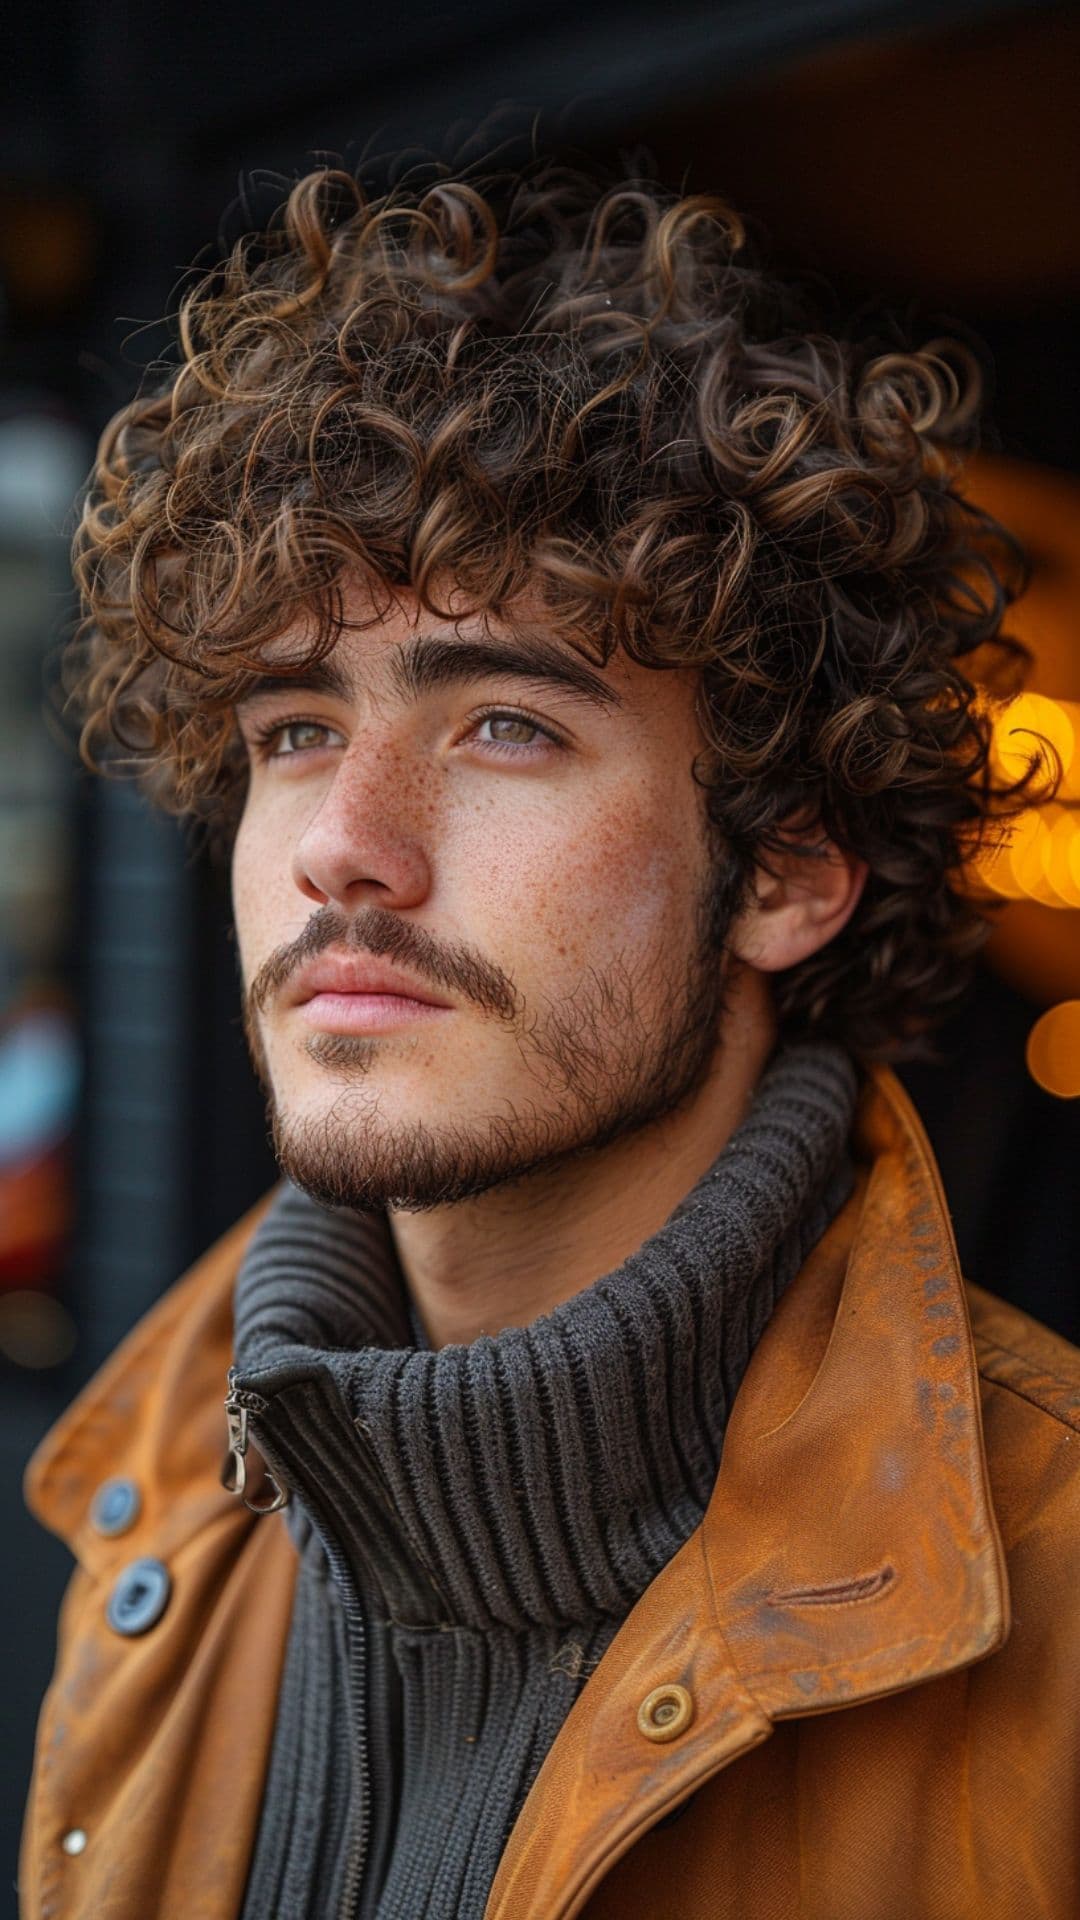 A man modelling a thick and curly hair.